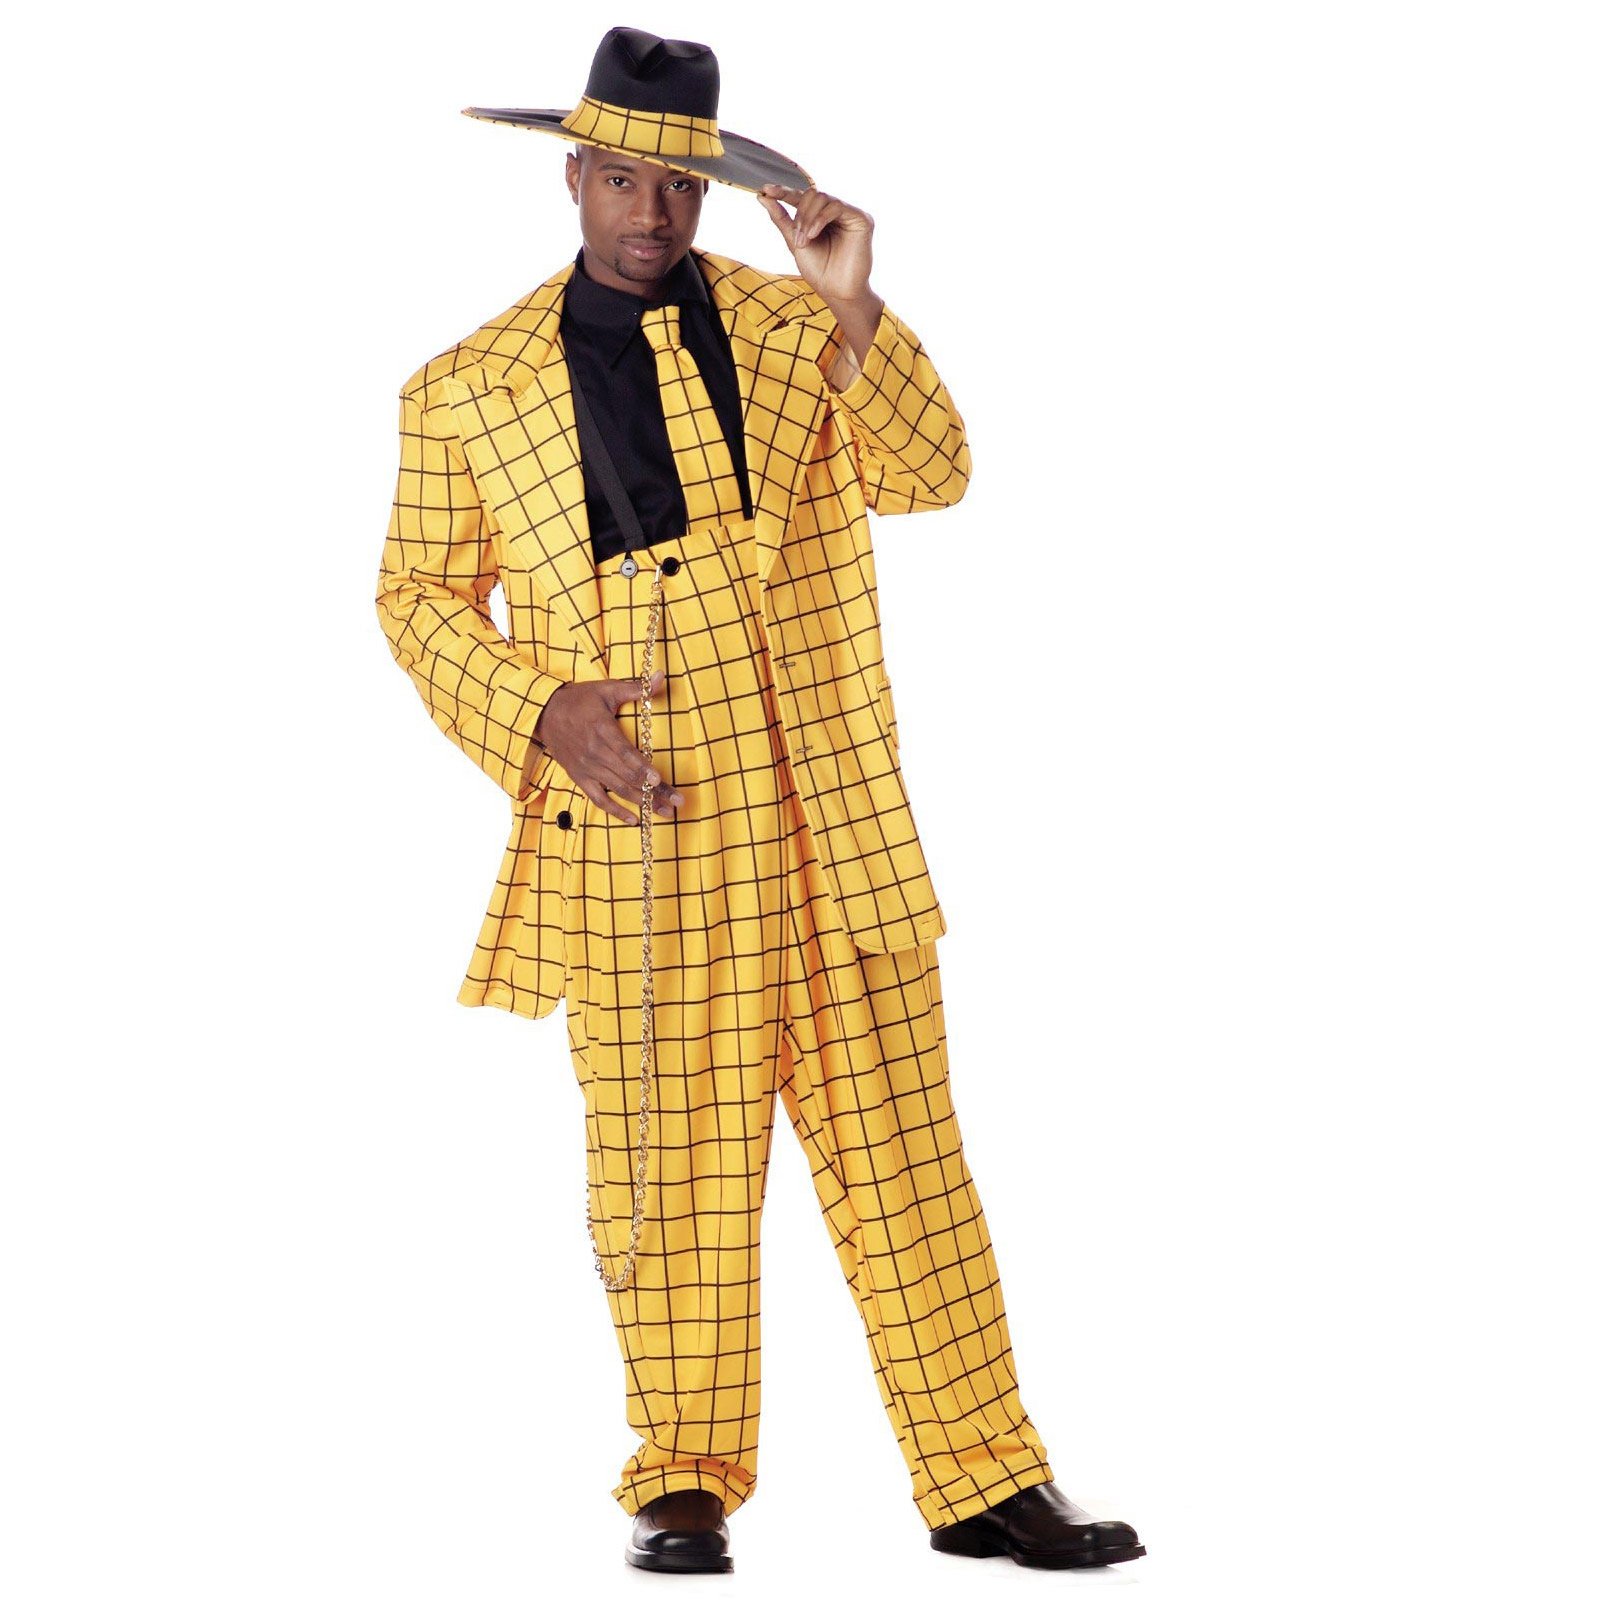 Click here for zoot suit music